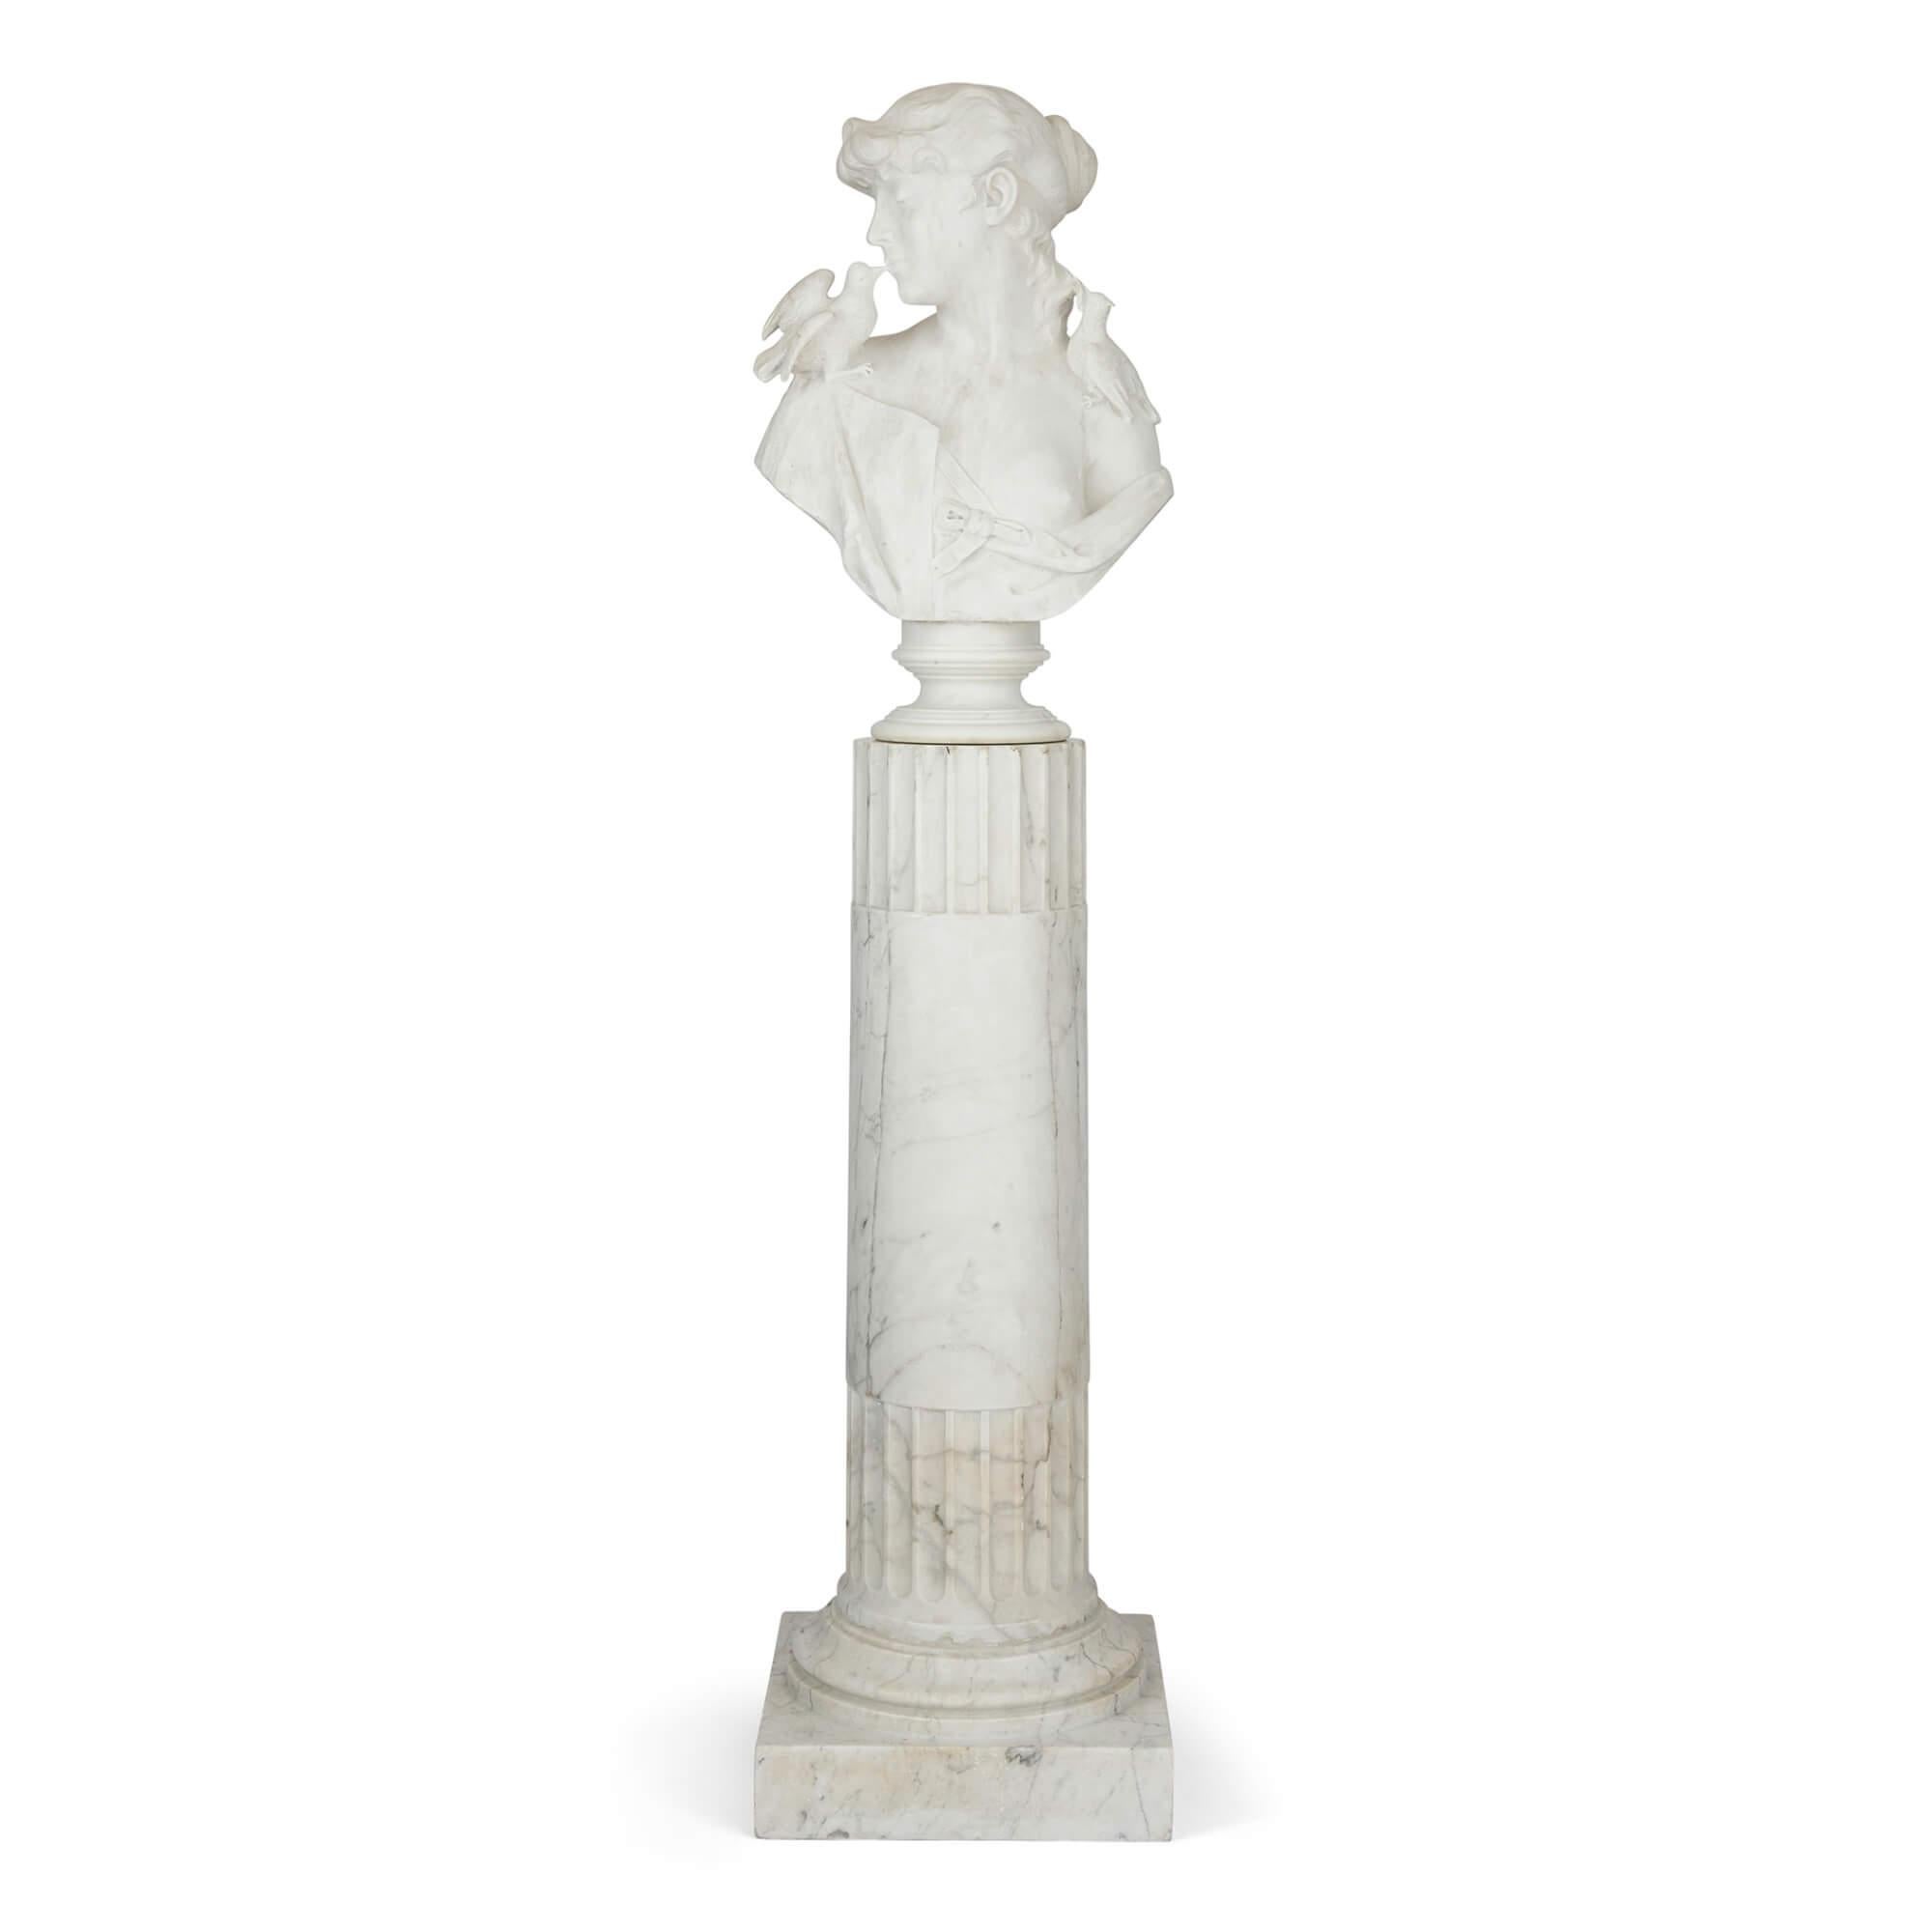 19th Century Pair of Carved Marble Busts on Stands by Italian Sculptor Arnaldo Fazzi For Sale